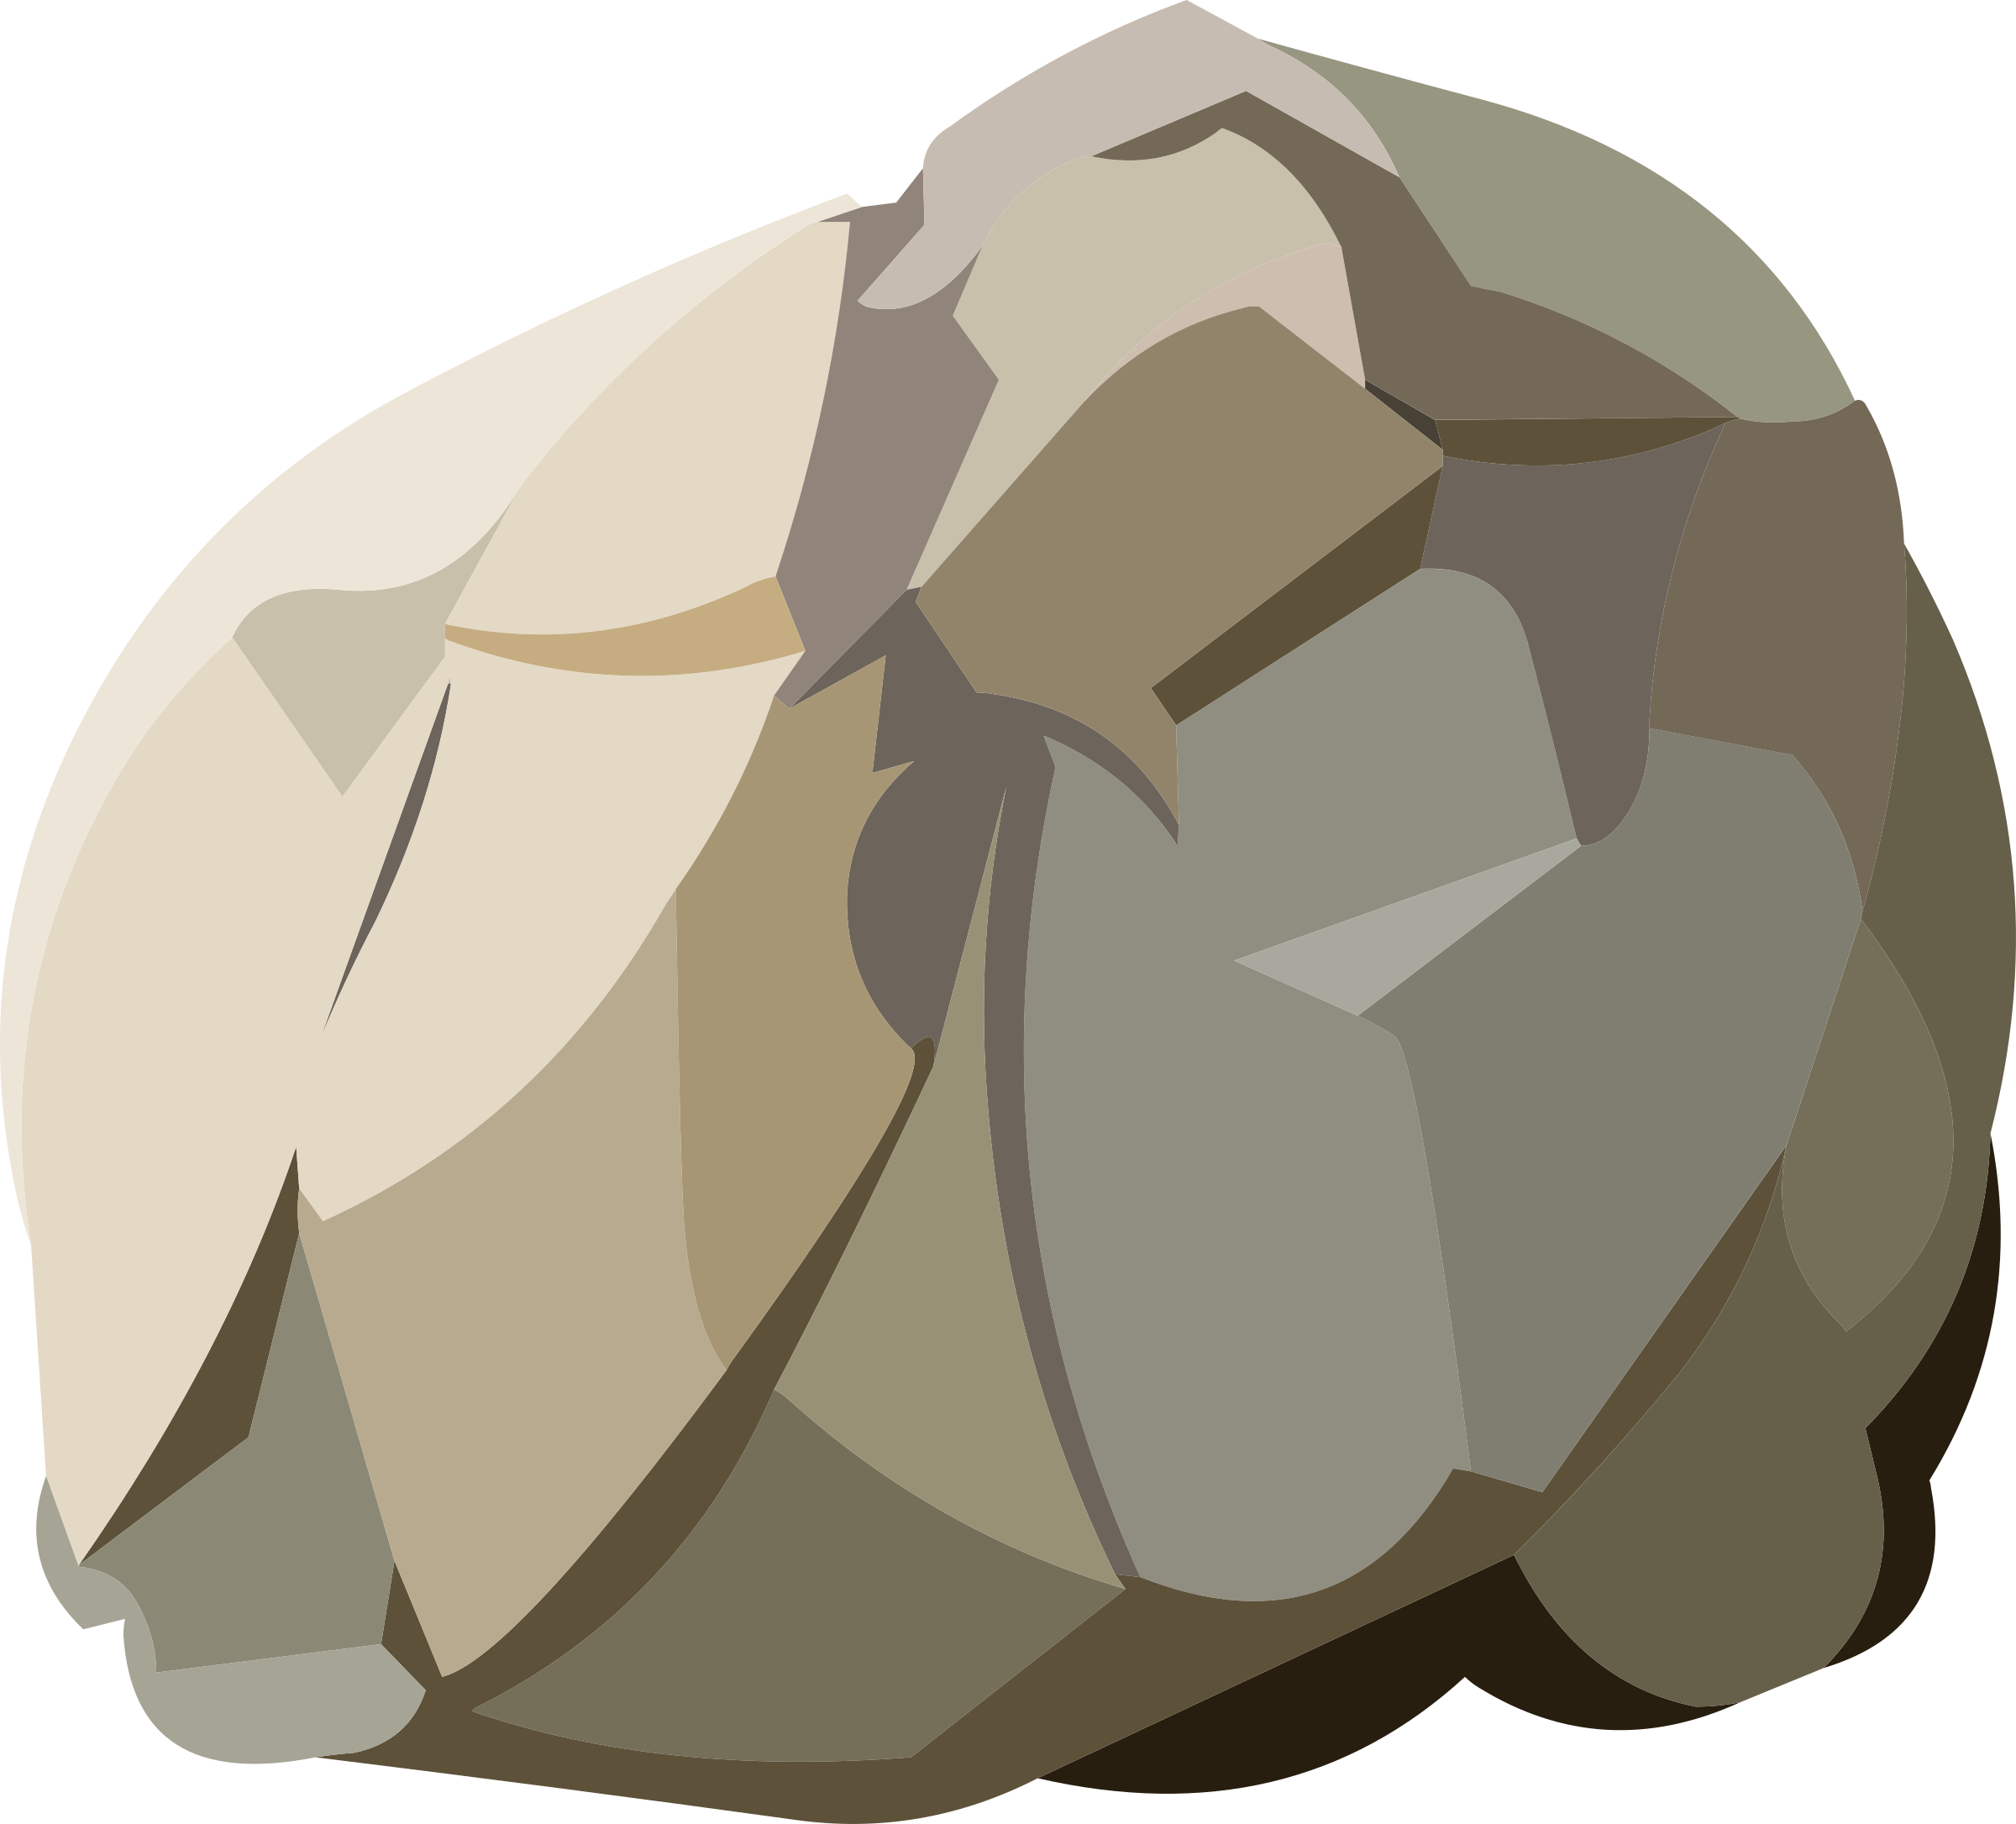 Rock Collection Clipart - Rocks Clipart